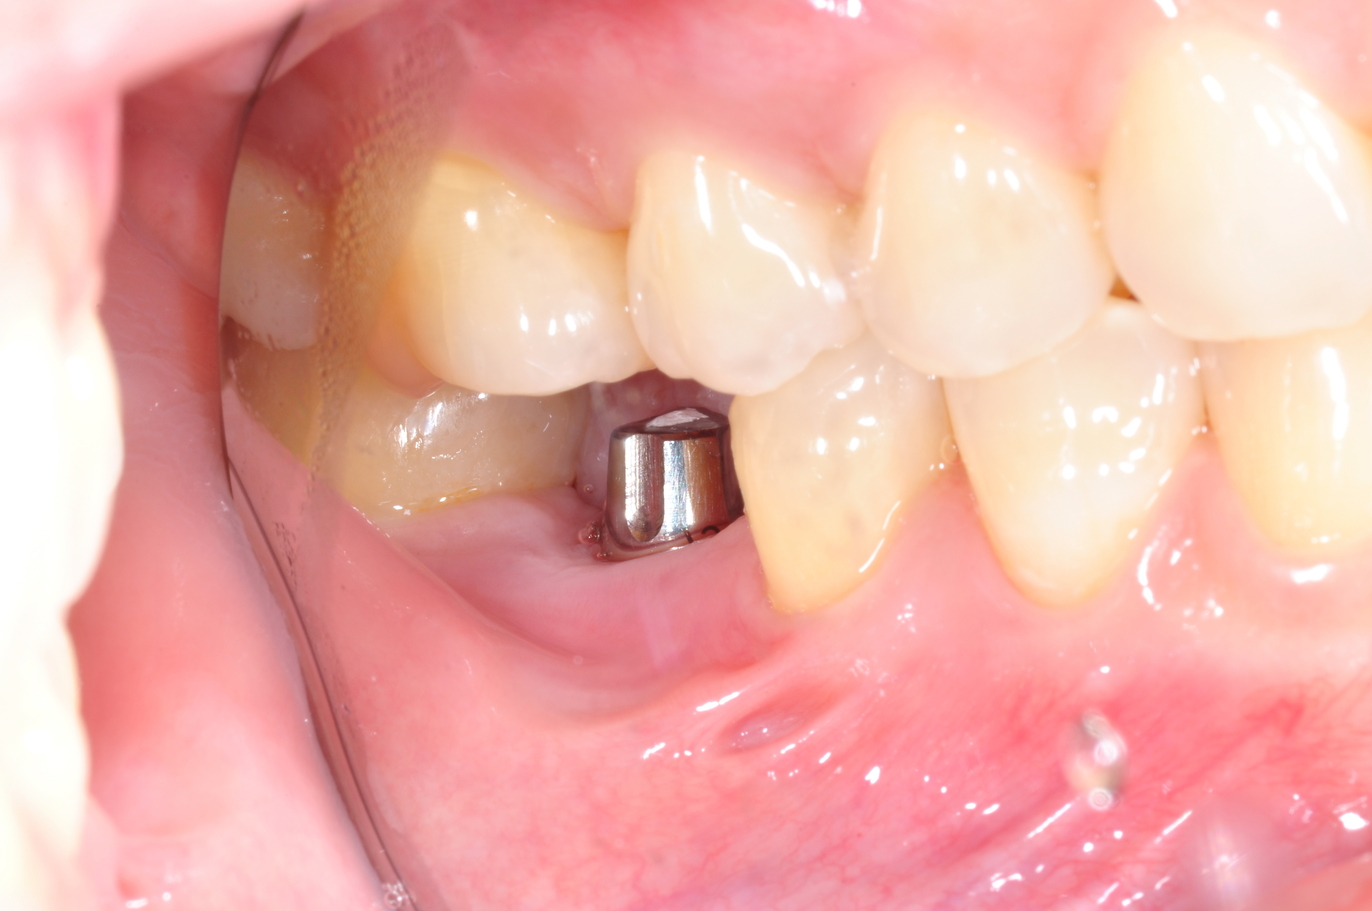 Dental Implant firmly intact